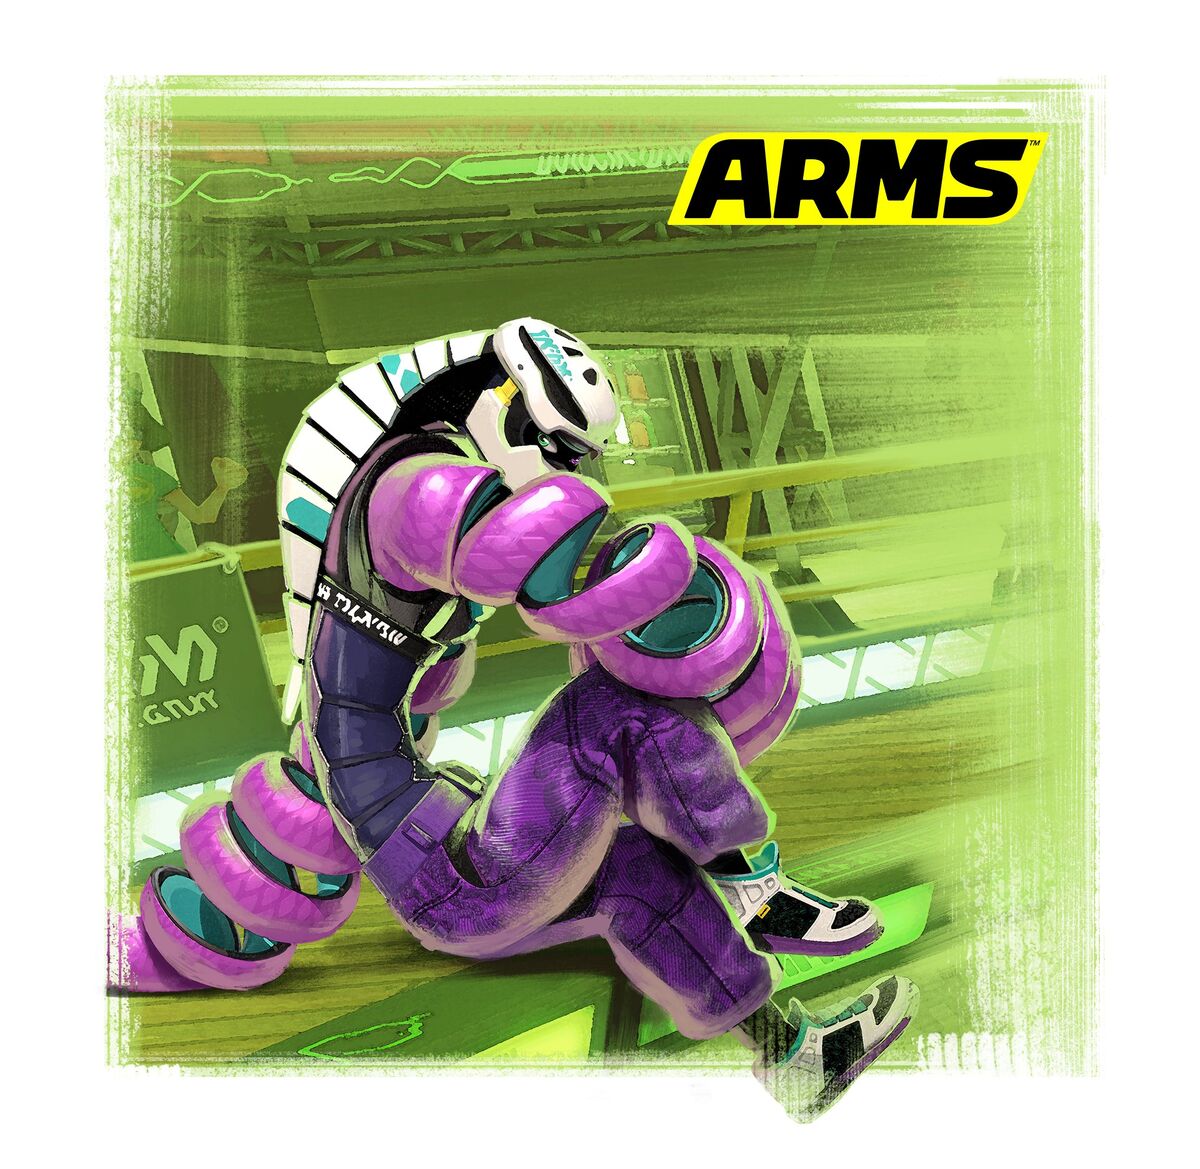 Kid Cobra - ARMS Institute, the ARMS Wiki